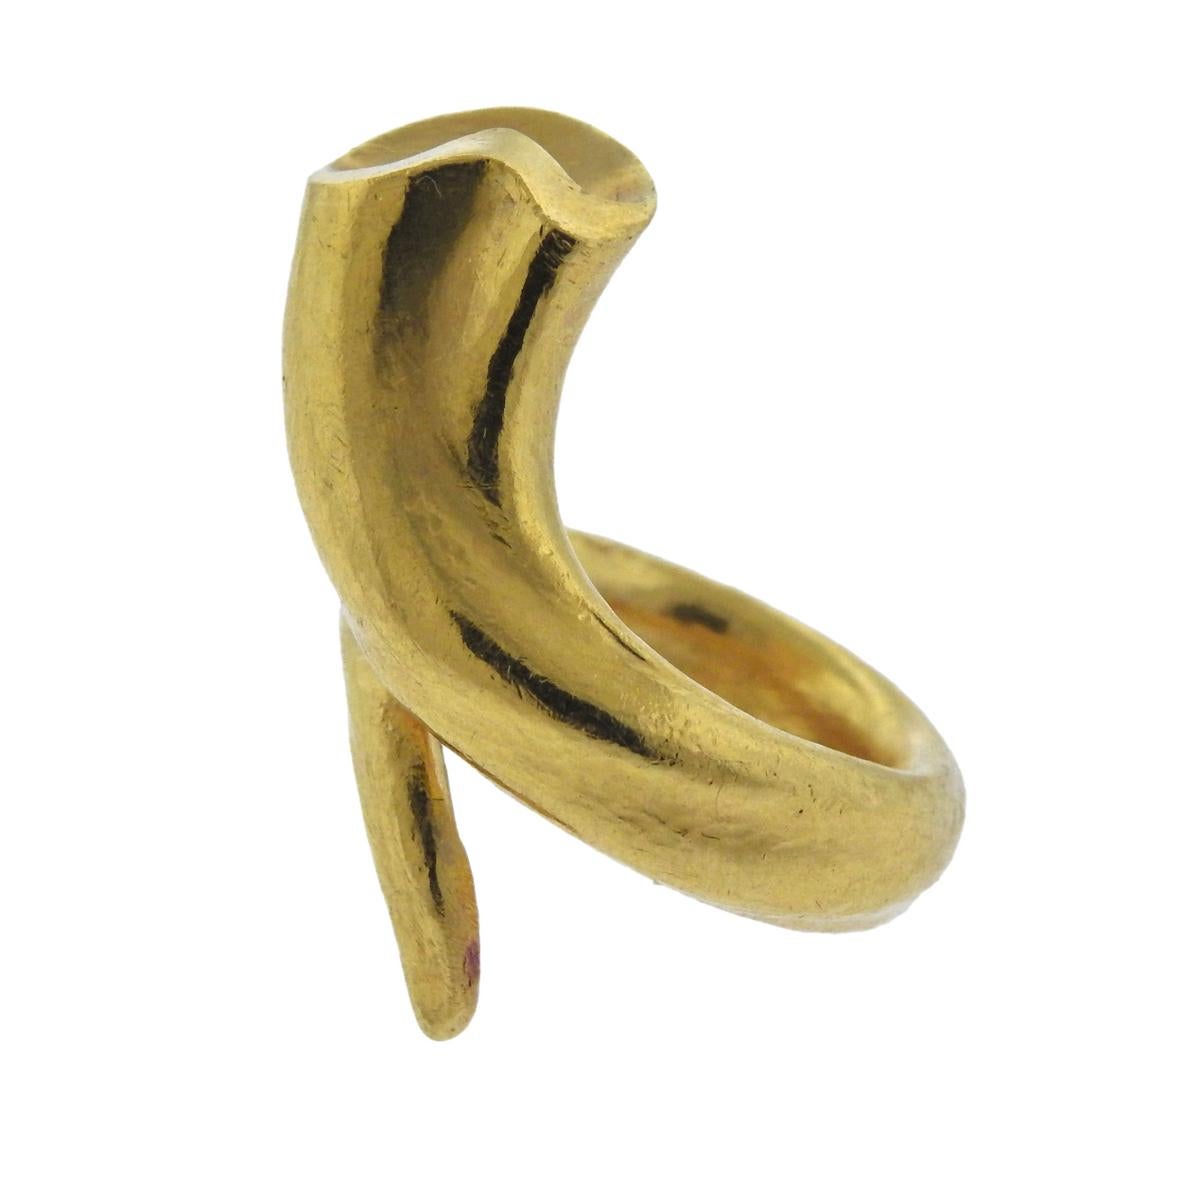 18k yellow gold wrap design ring, crafted by Greek designer Ilias Lalaounis. Ring size - 4, ring top is 28mm wide and weighs 9.2 grams. Marked 750, Ilias Lalaounis hallmark, Greece.